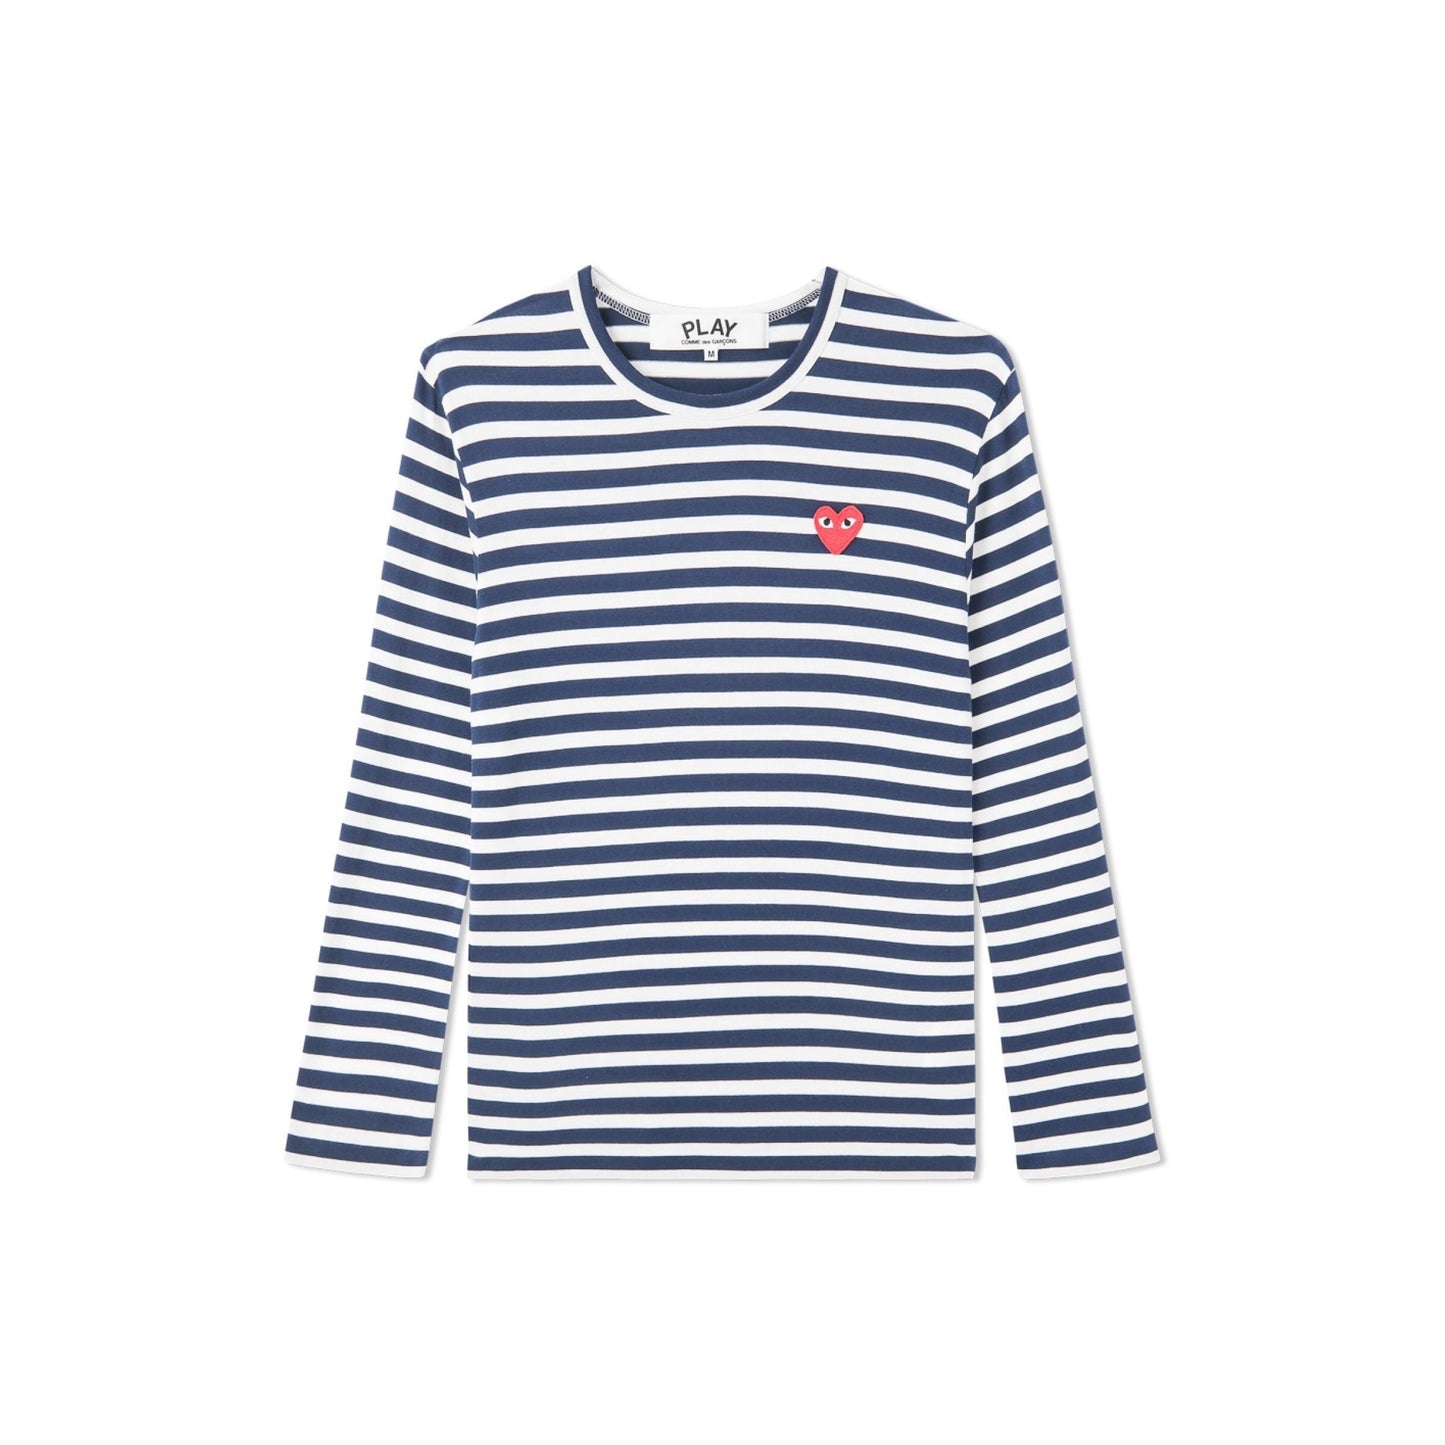 CDG Play Long Sleeve striped tee "Blue & White" - Centrall Online